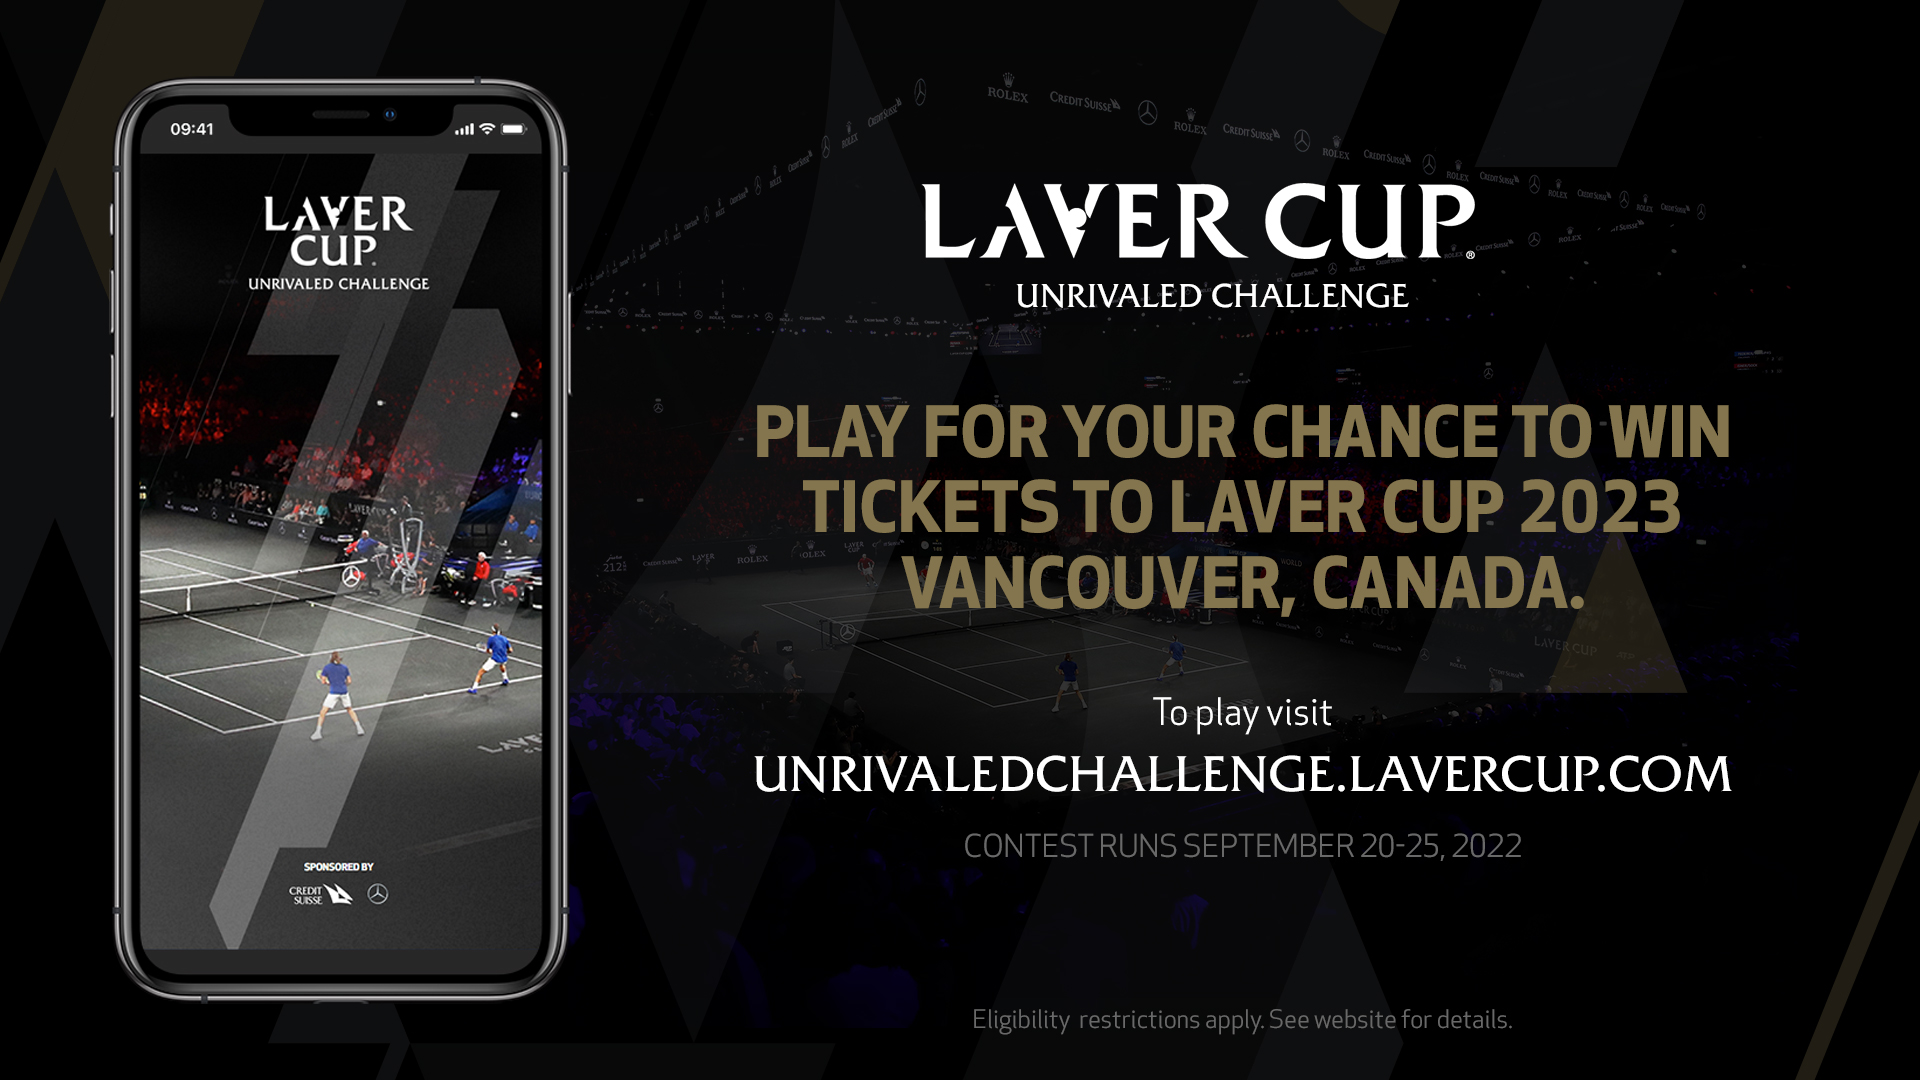 Laver Cup Unrivaled Challenge gives fans a shot at winning Vancouver 2023 tickets News Laver Cup